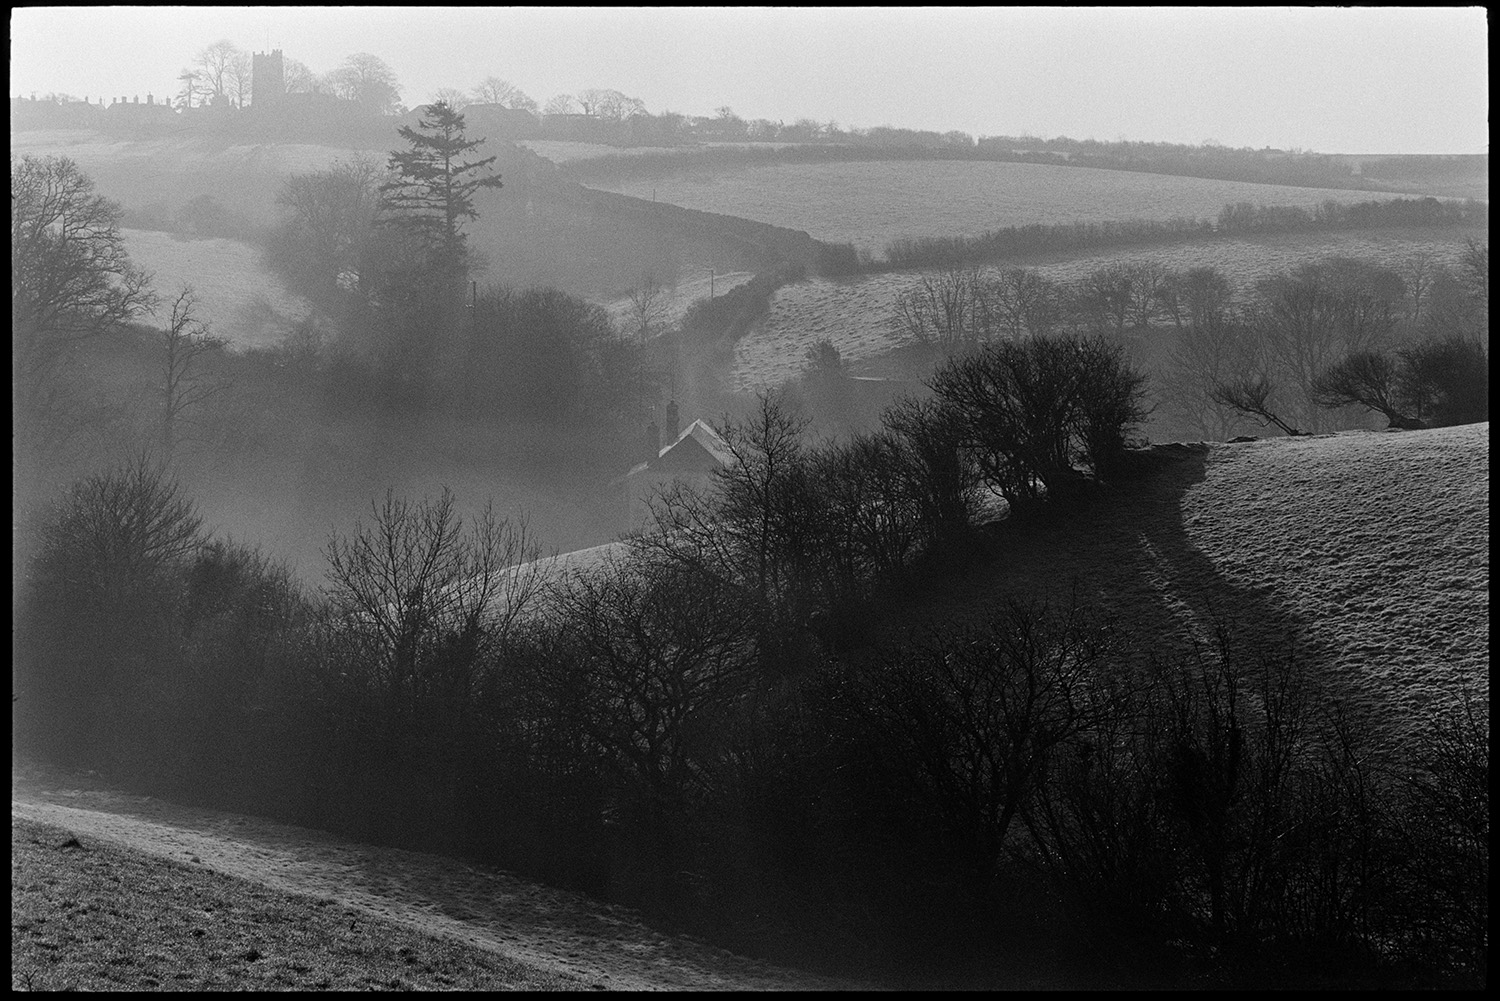 Misty view fields, church tower. 
[A misty landscape of fields, trees and hedgerows at Burrington. Burrington church tower can be seen on the horizon.]